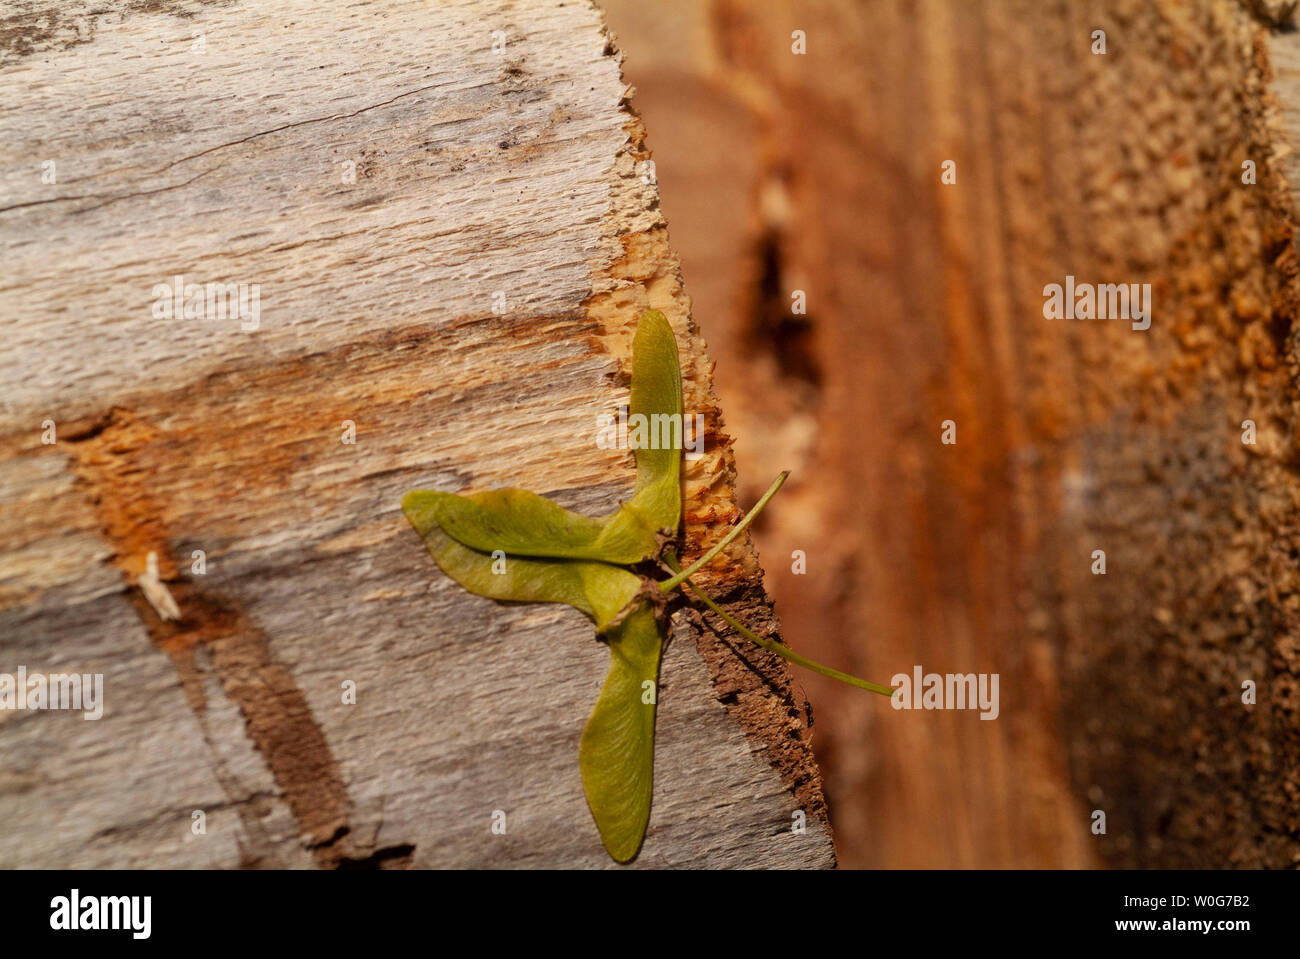 NATURAL: A maple tree seed leaf lay on a wooden log. Stock Photo